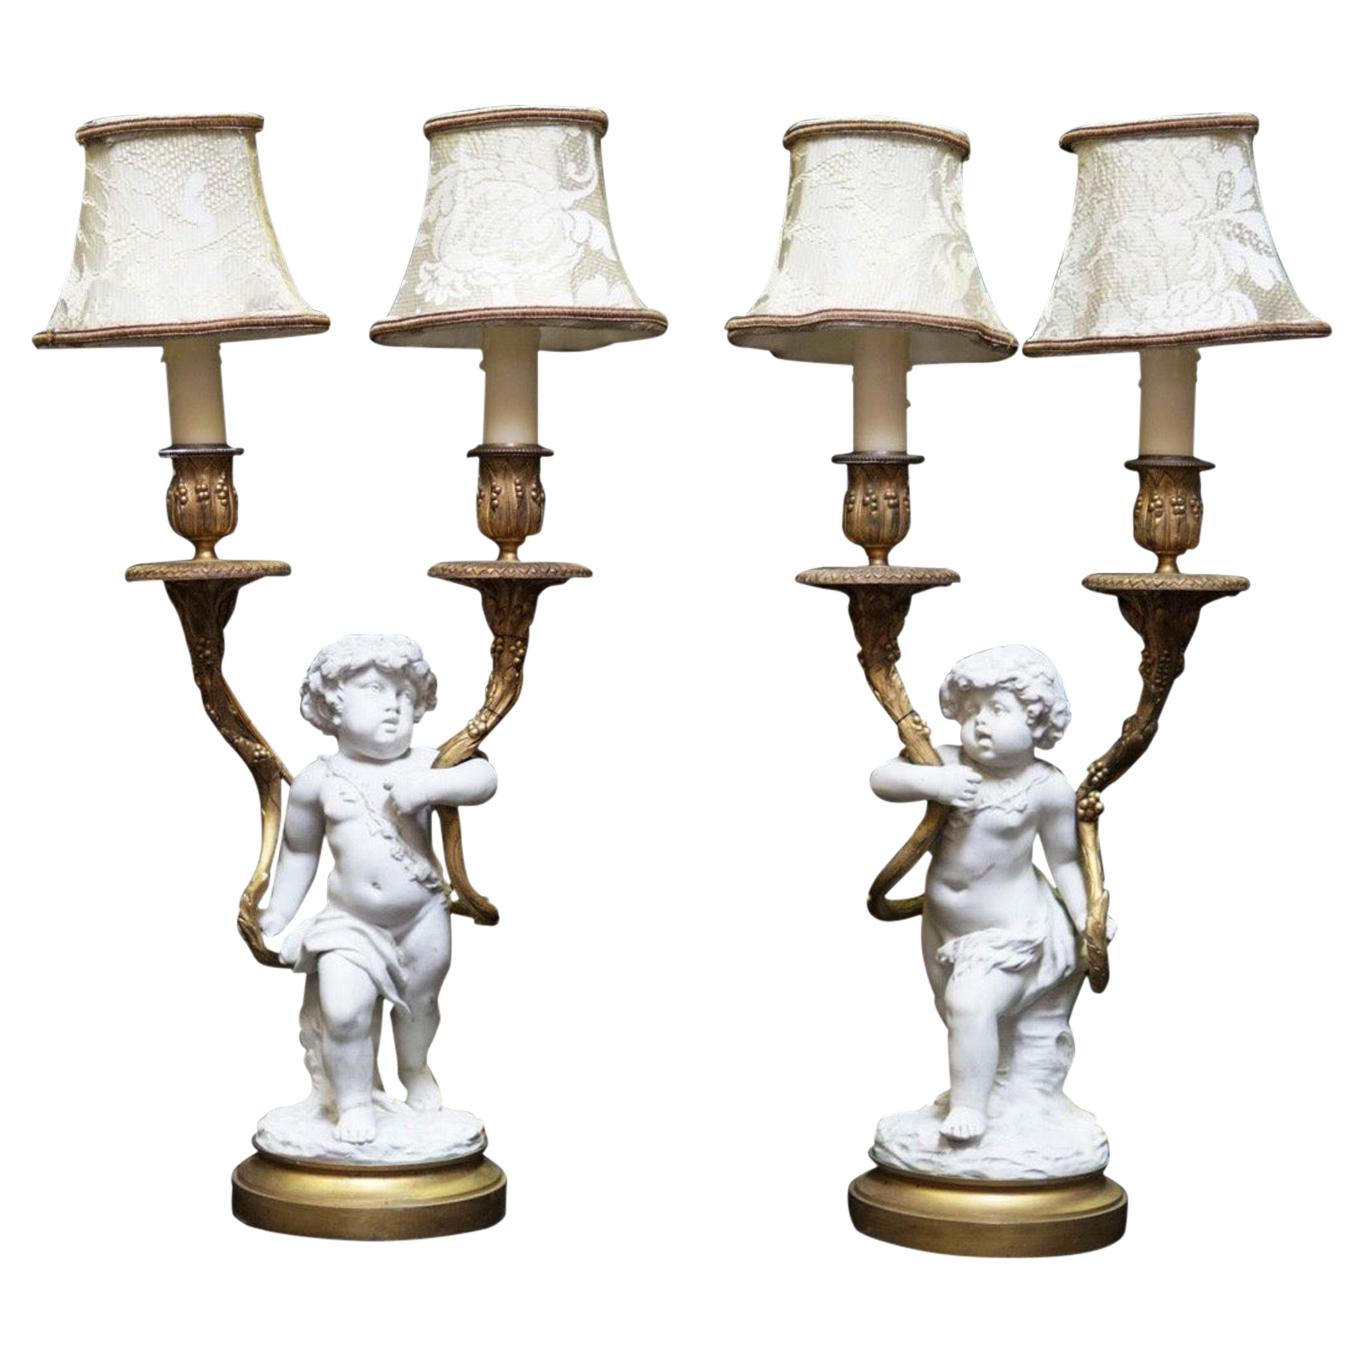 Pair of French White Porcelain and Ormolu Lamps, 19 Century